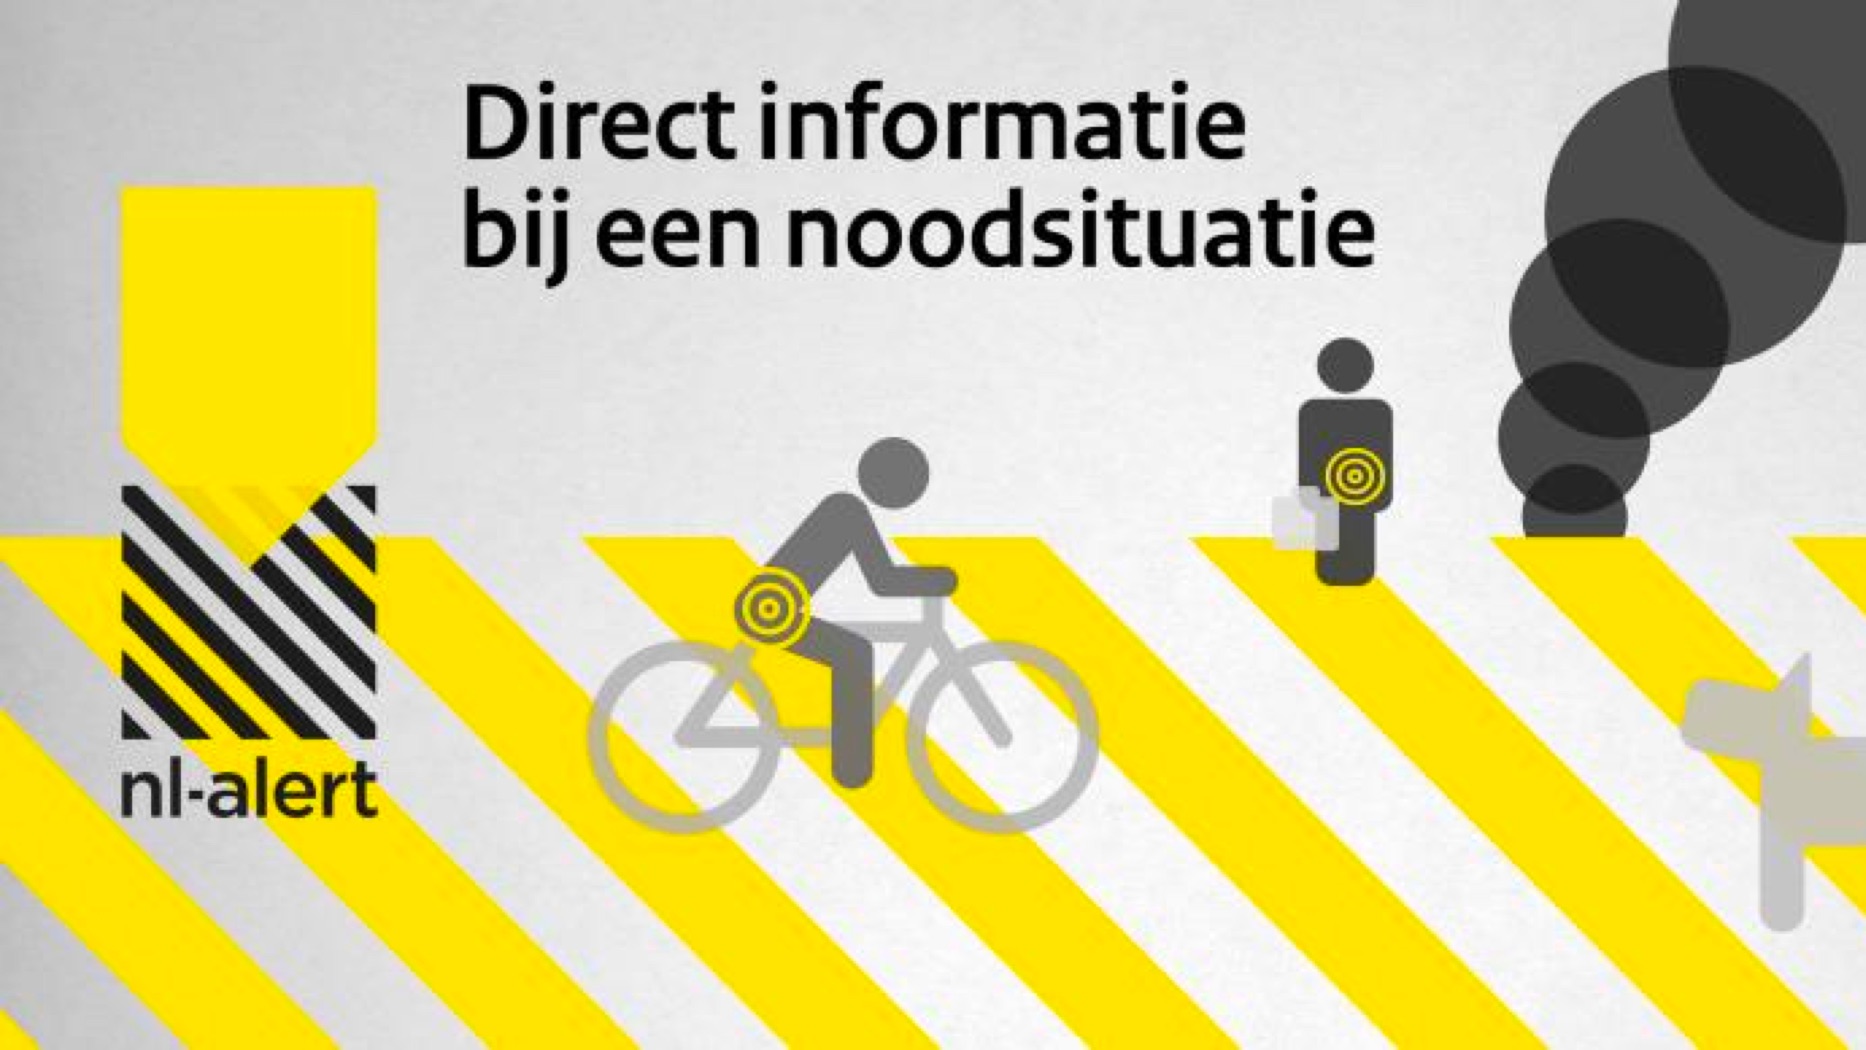 Keeping the Netherlands informed about NL-Alerts